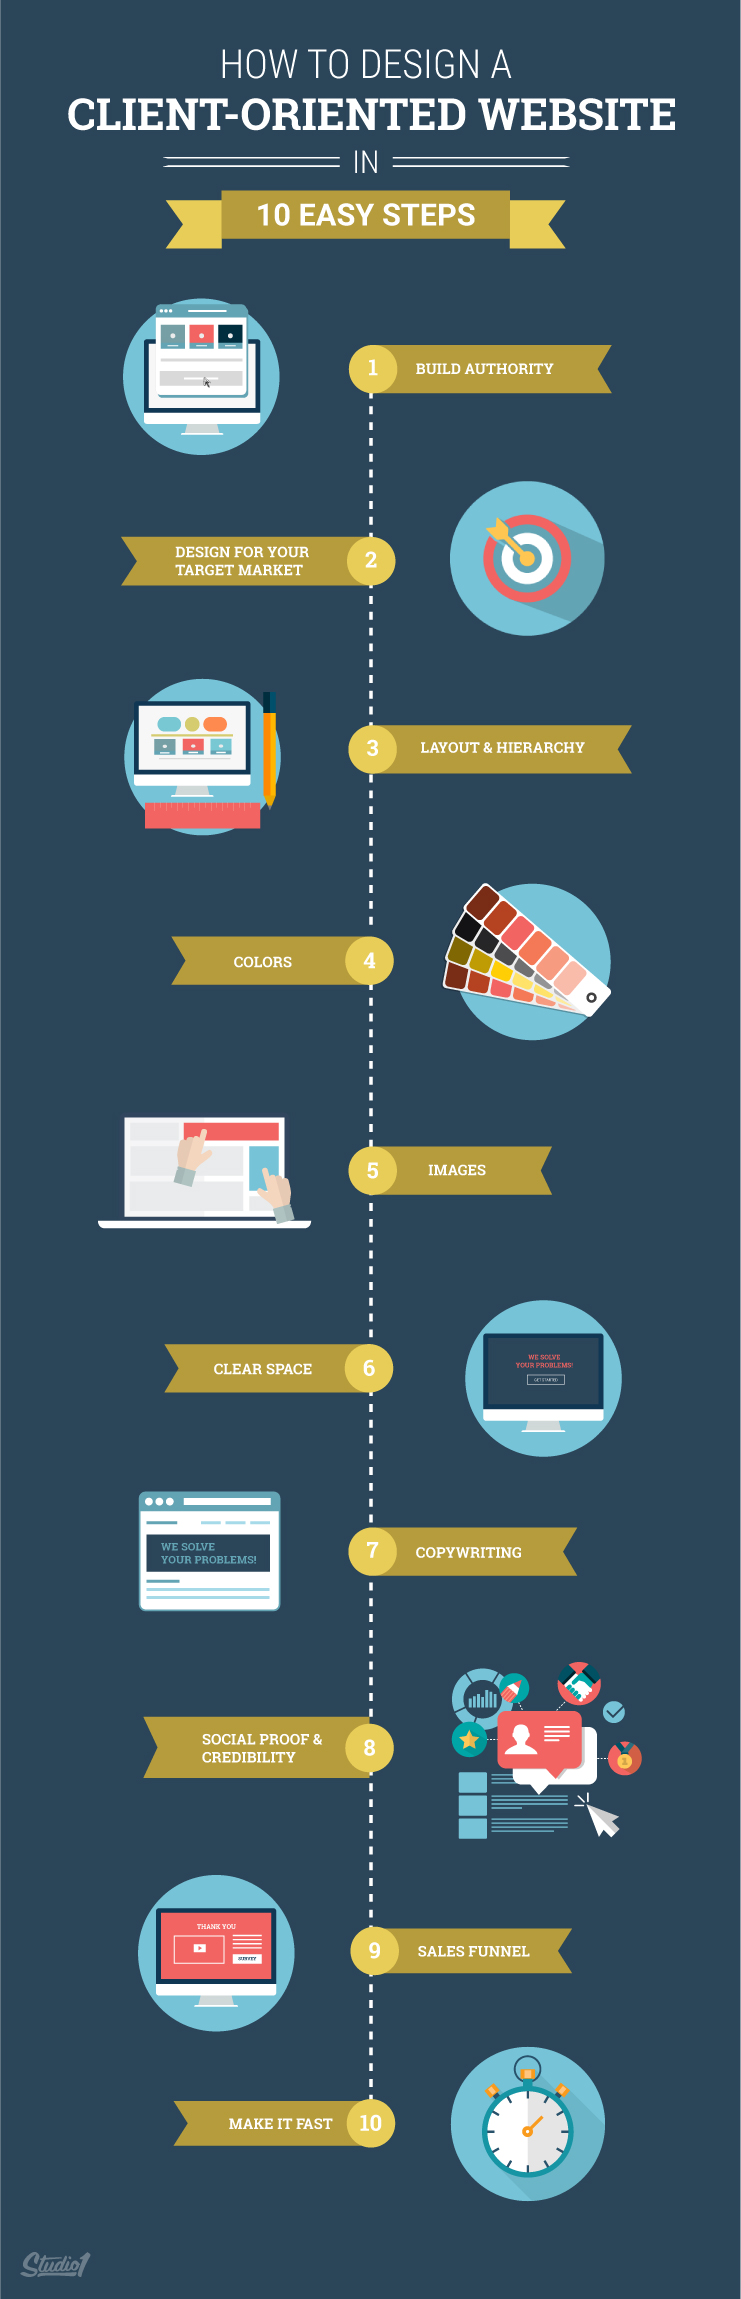 how to design a client-oriented website - infographic